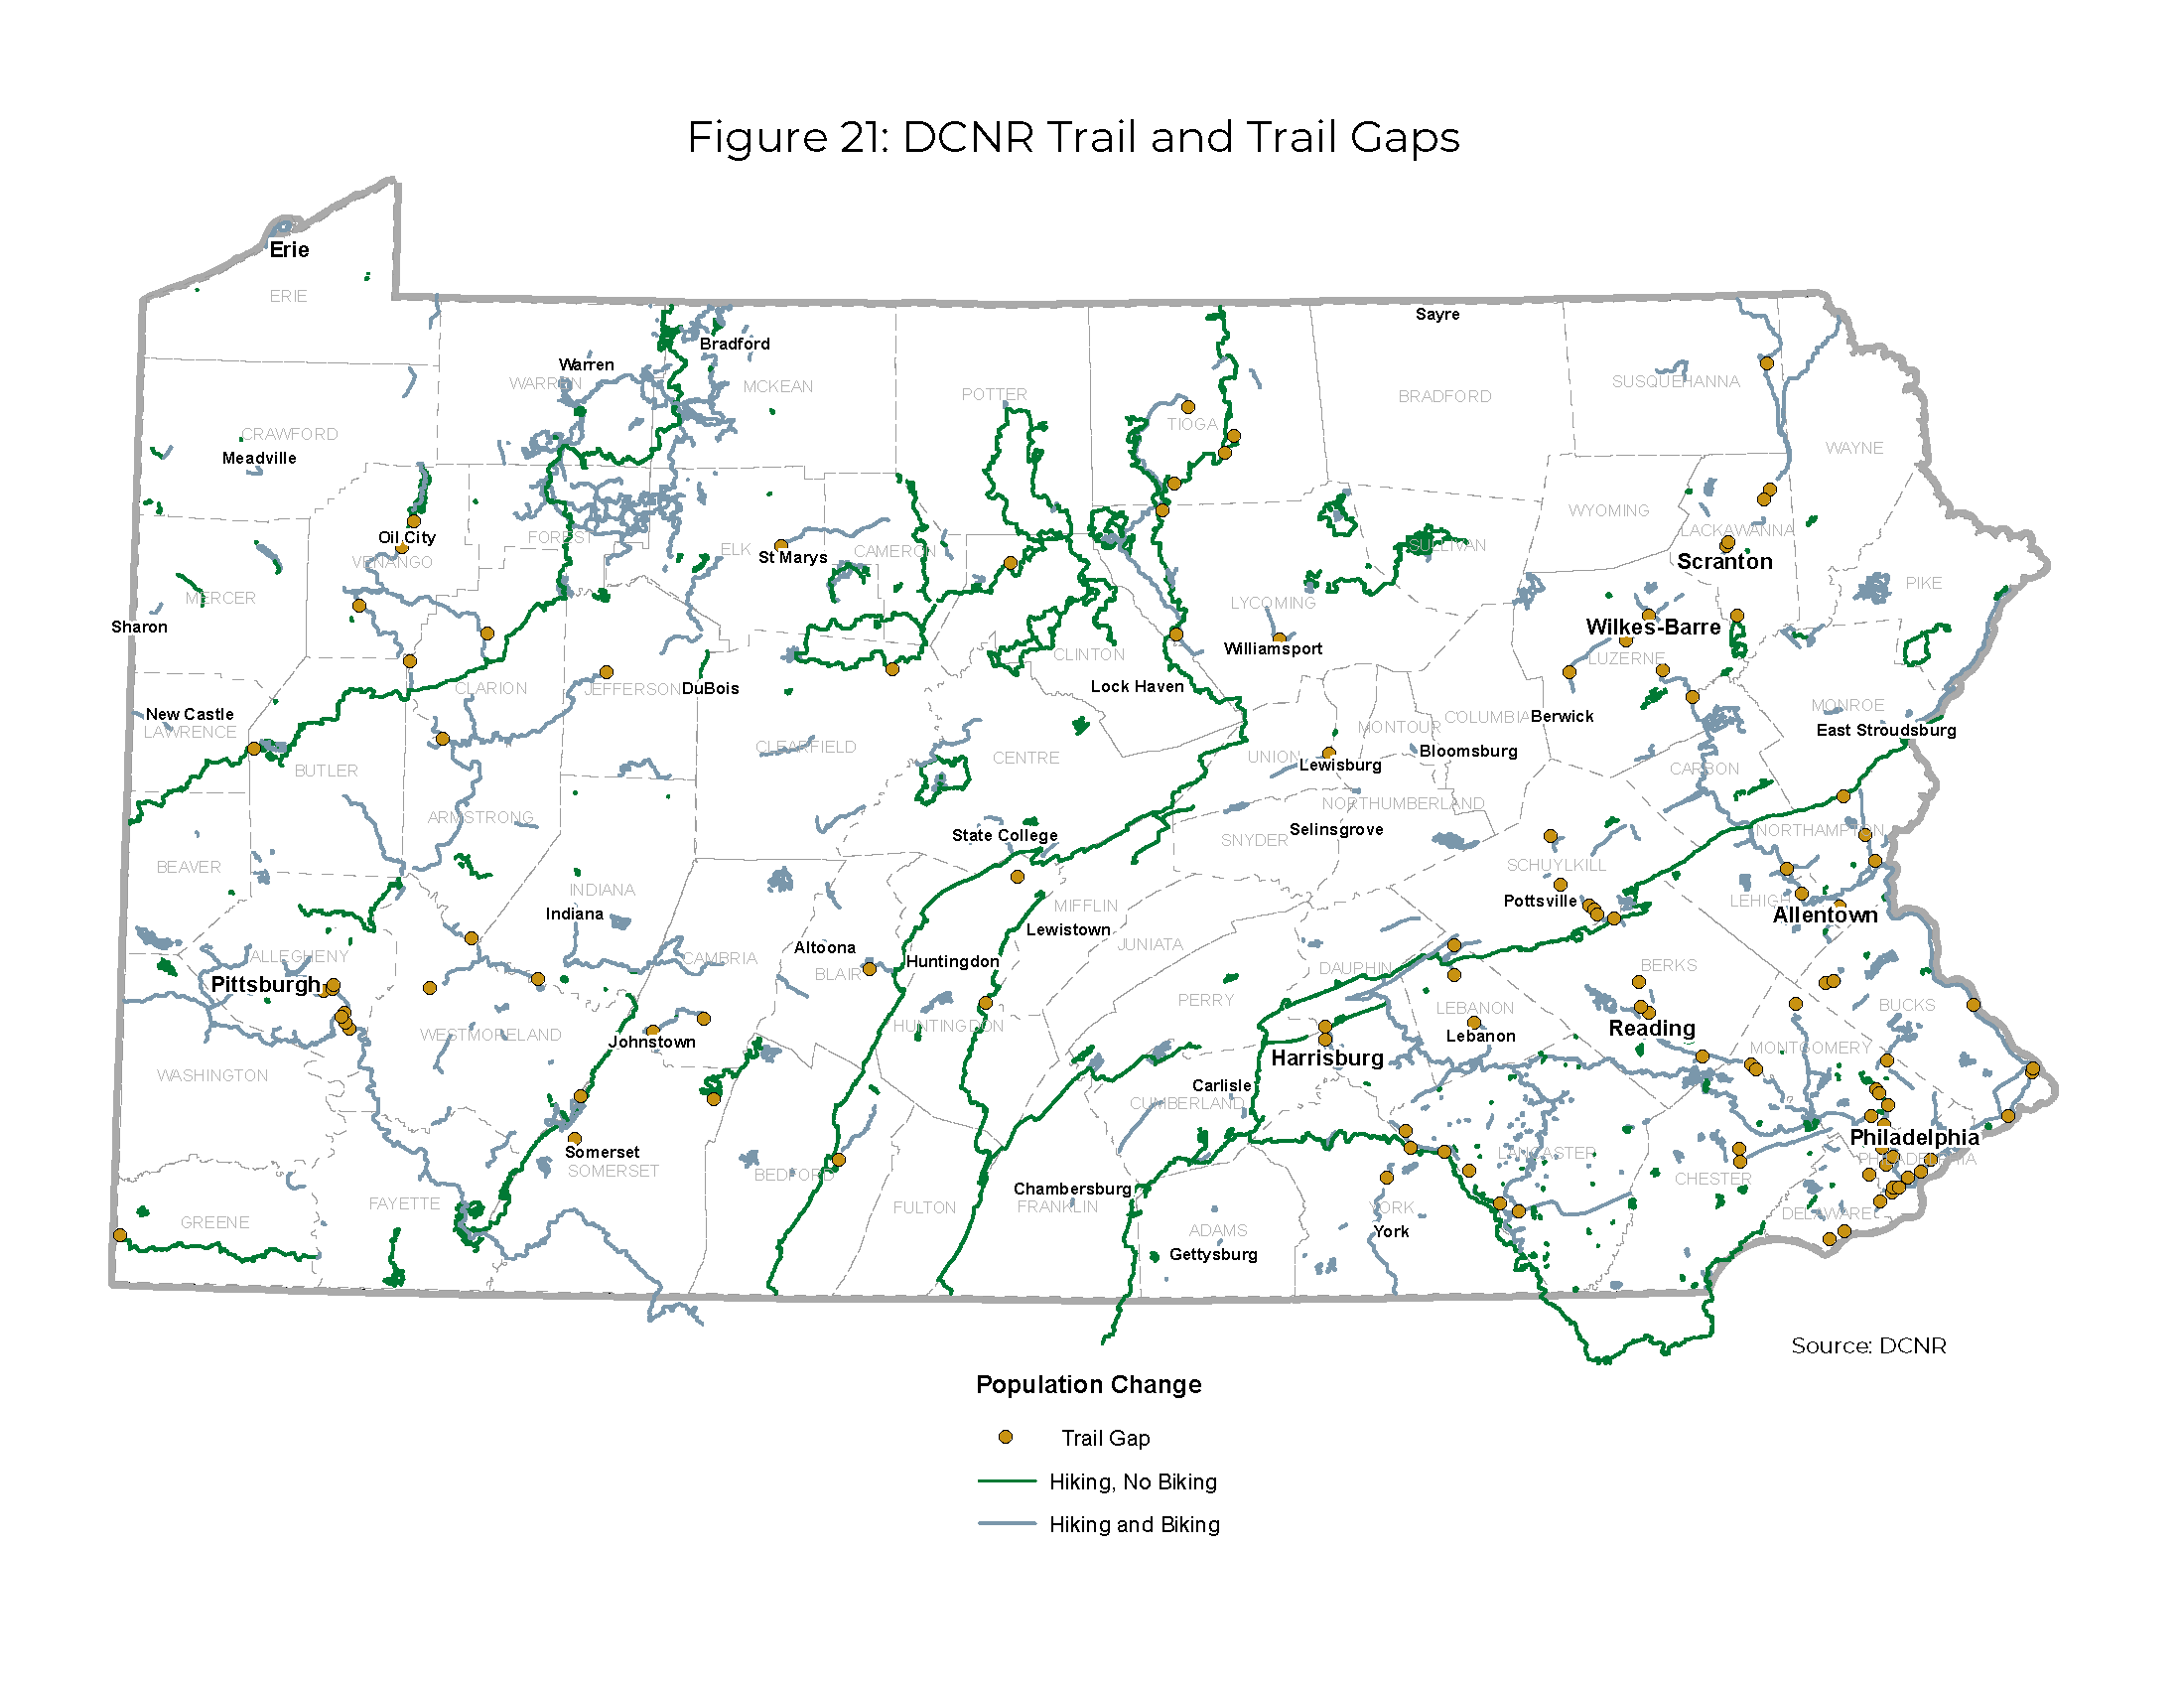 Figure 21 is a DCNR map of Pennsylvania illustrating DCNR Trails with hiking and no biking, hiking and biking allowed and trail gaps.